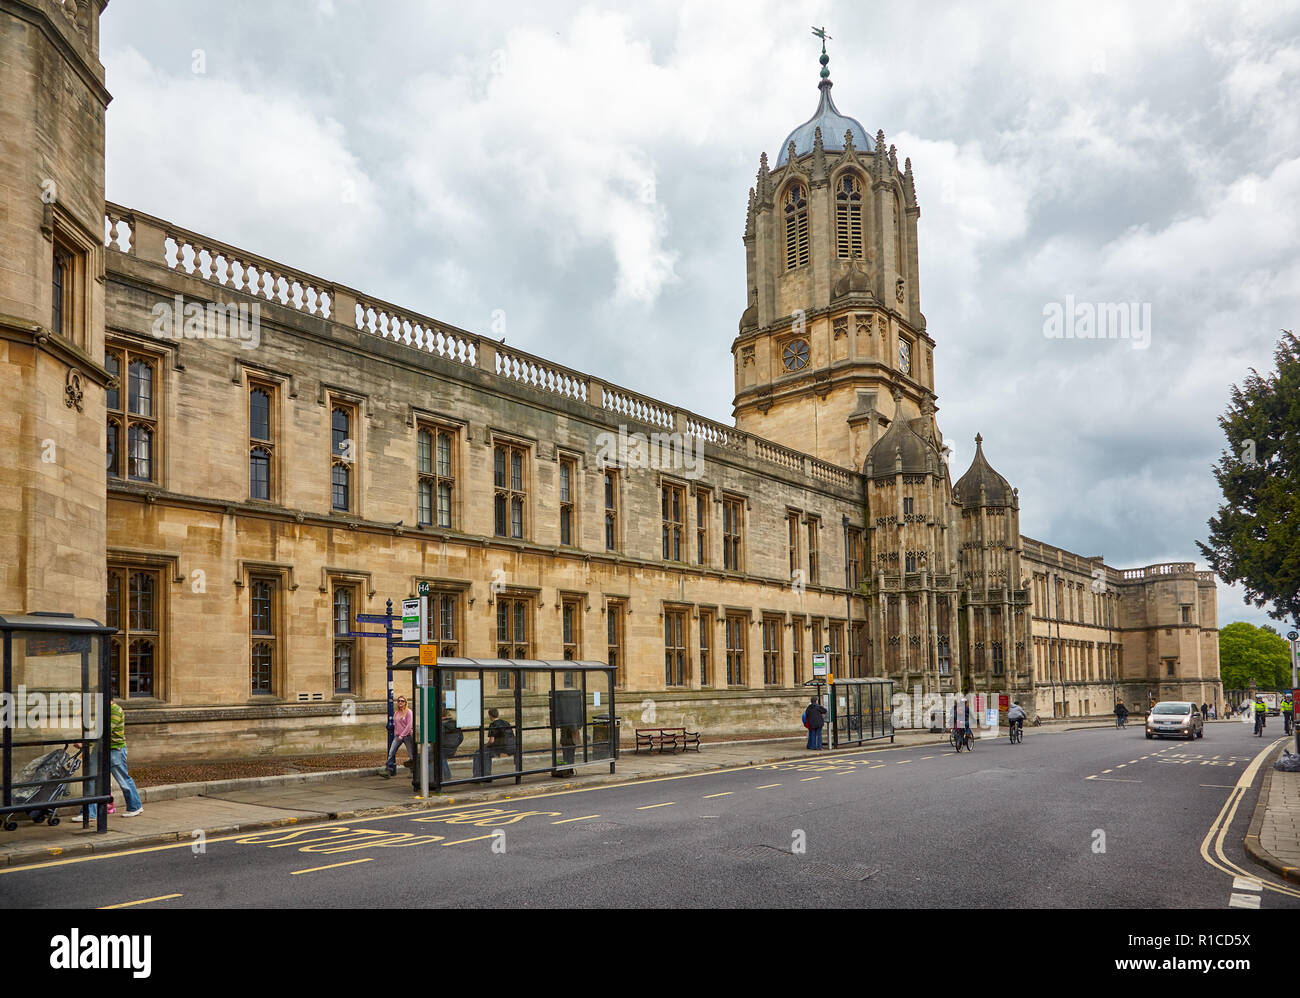 OXFORD, ENGLAND - MAY 15, 2009: Tom Tower and Tom Quad. View from the St. Aldate's street. Oxford University. England Stock Photo